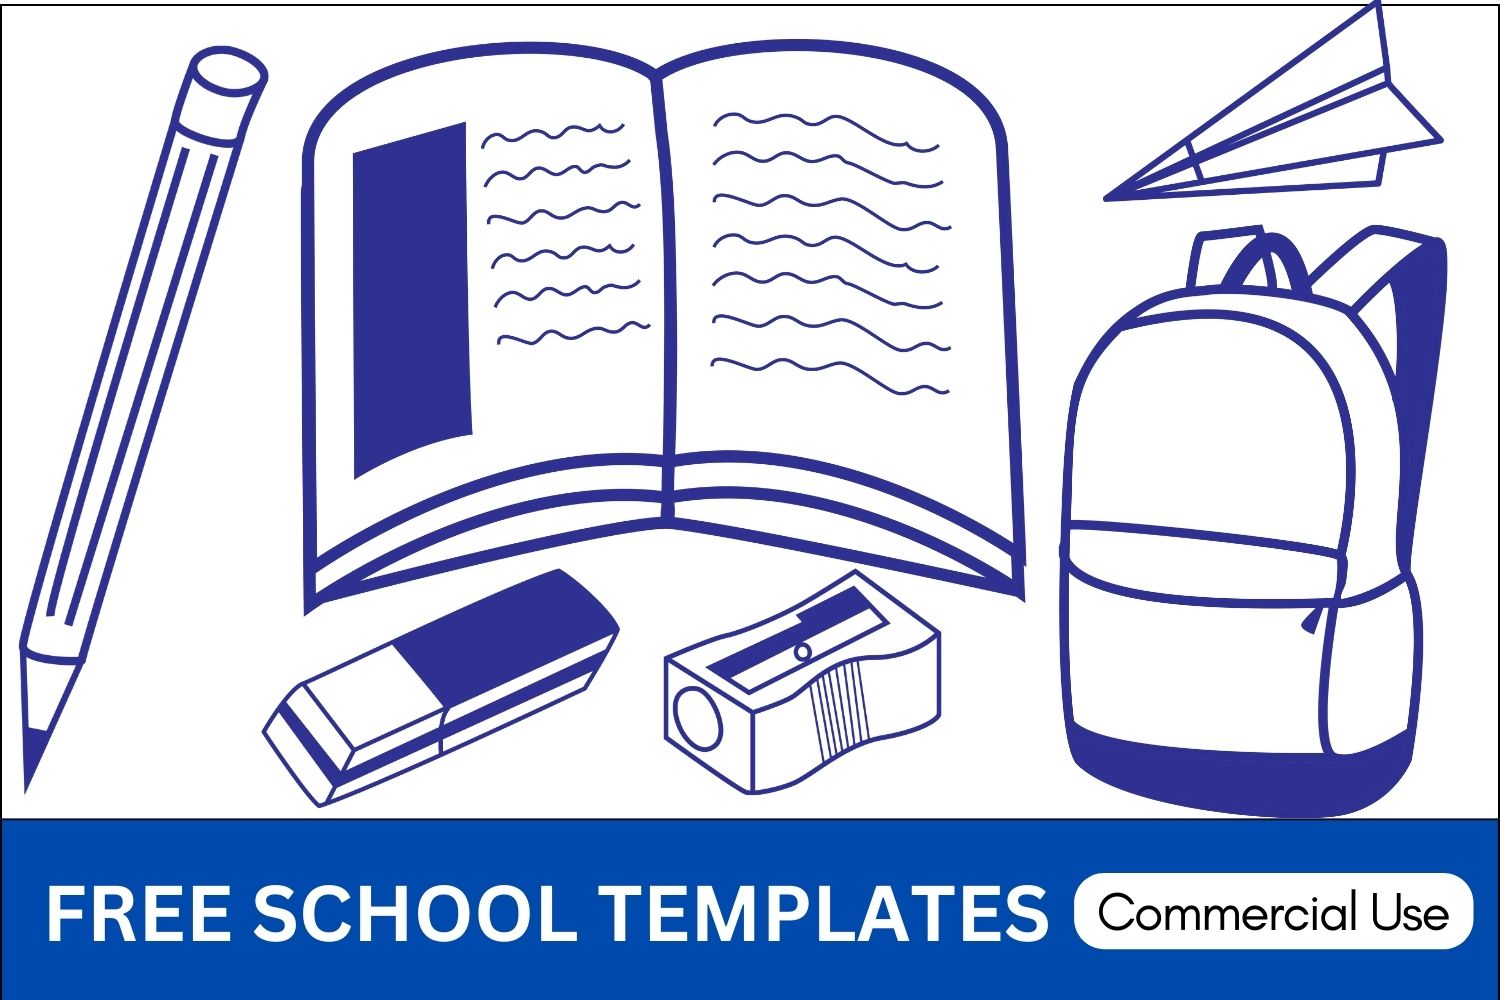 school templates, silhouette, cliparts, stencils, school icons, college clipart, back to school, education, learning, free, download, svg, cricut cut files, hand drawn, coloring vector